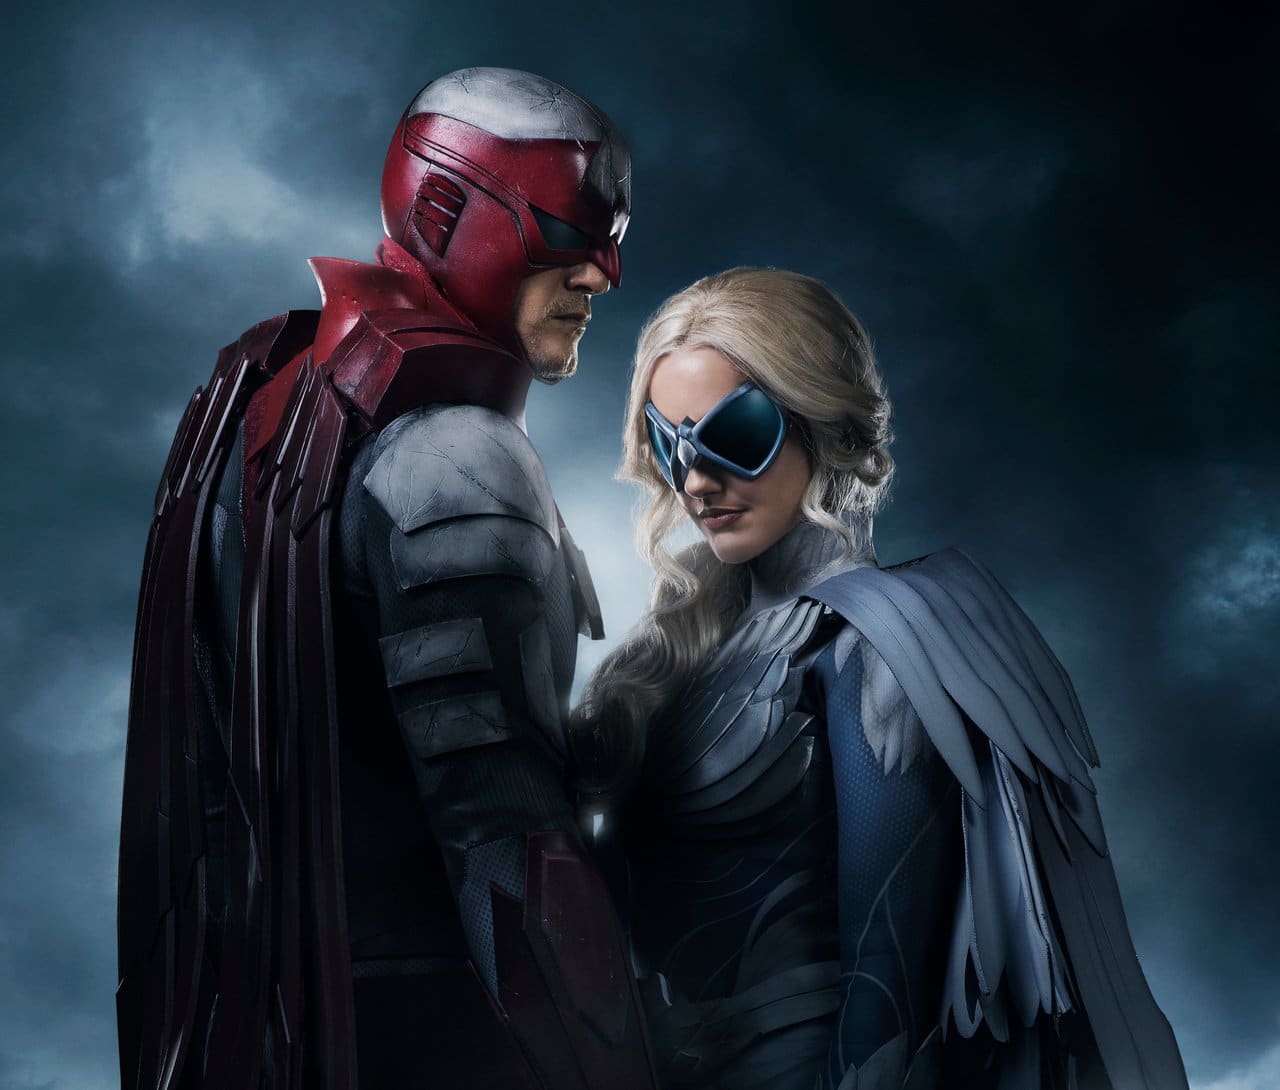 ‘titans’ s1e2 – we have the beginnings of our romantic storyline